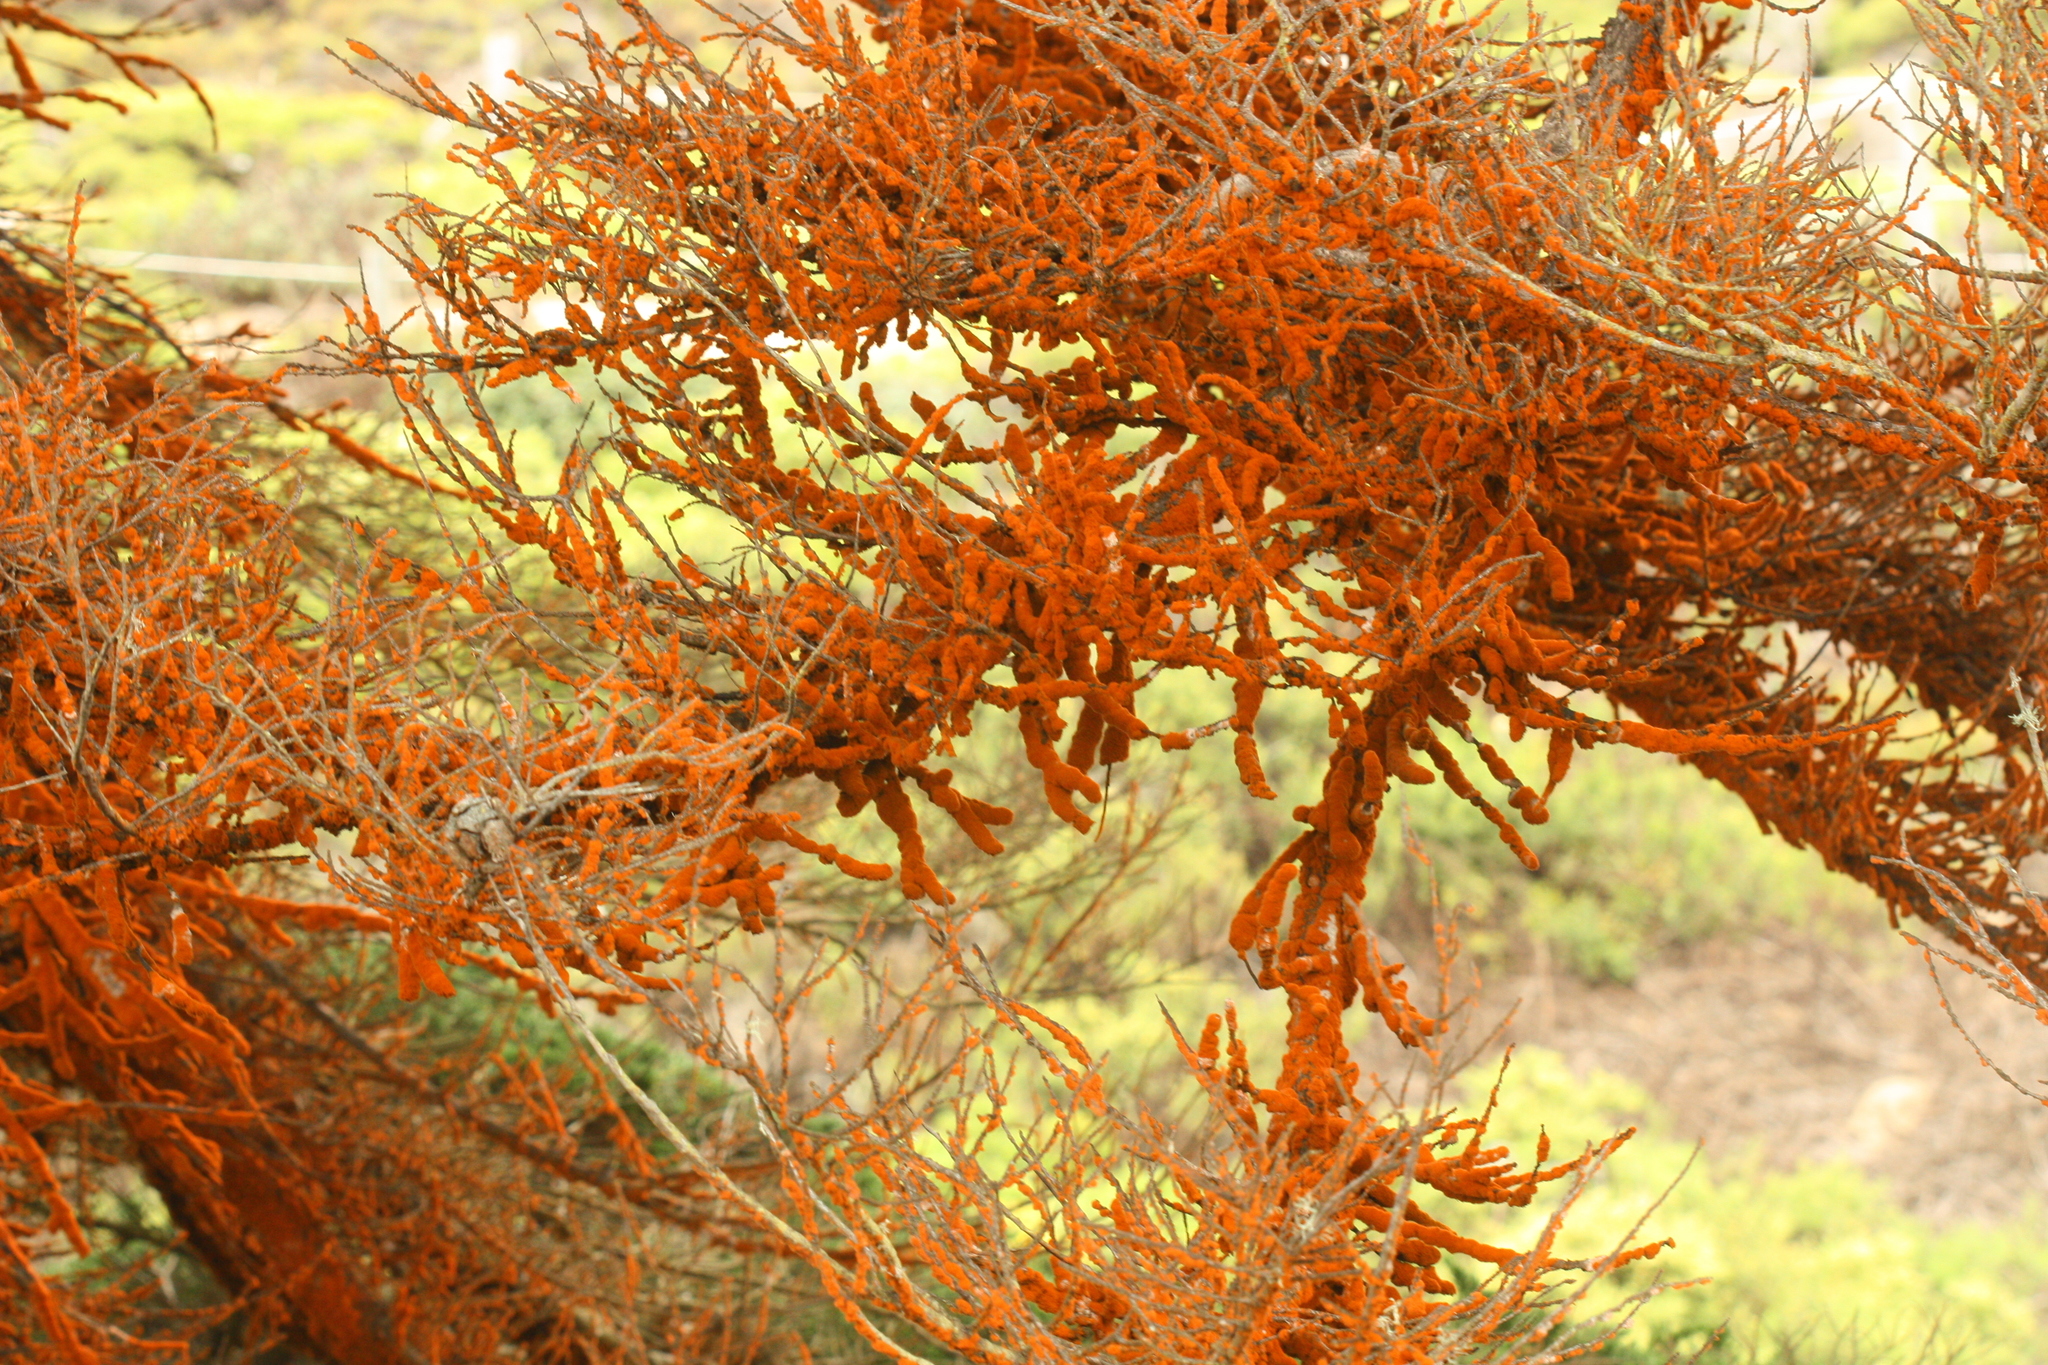 Branches of a tree with no foliage, covered in thick orange fuzz